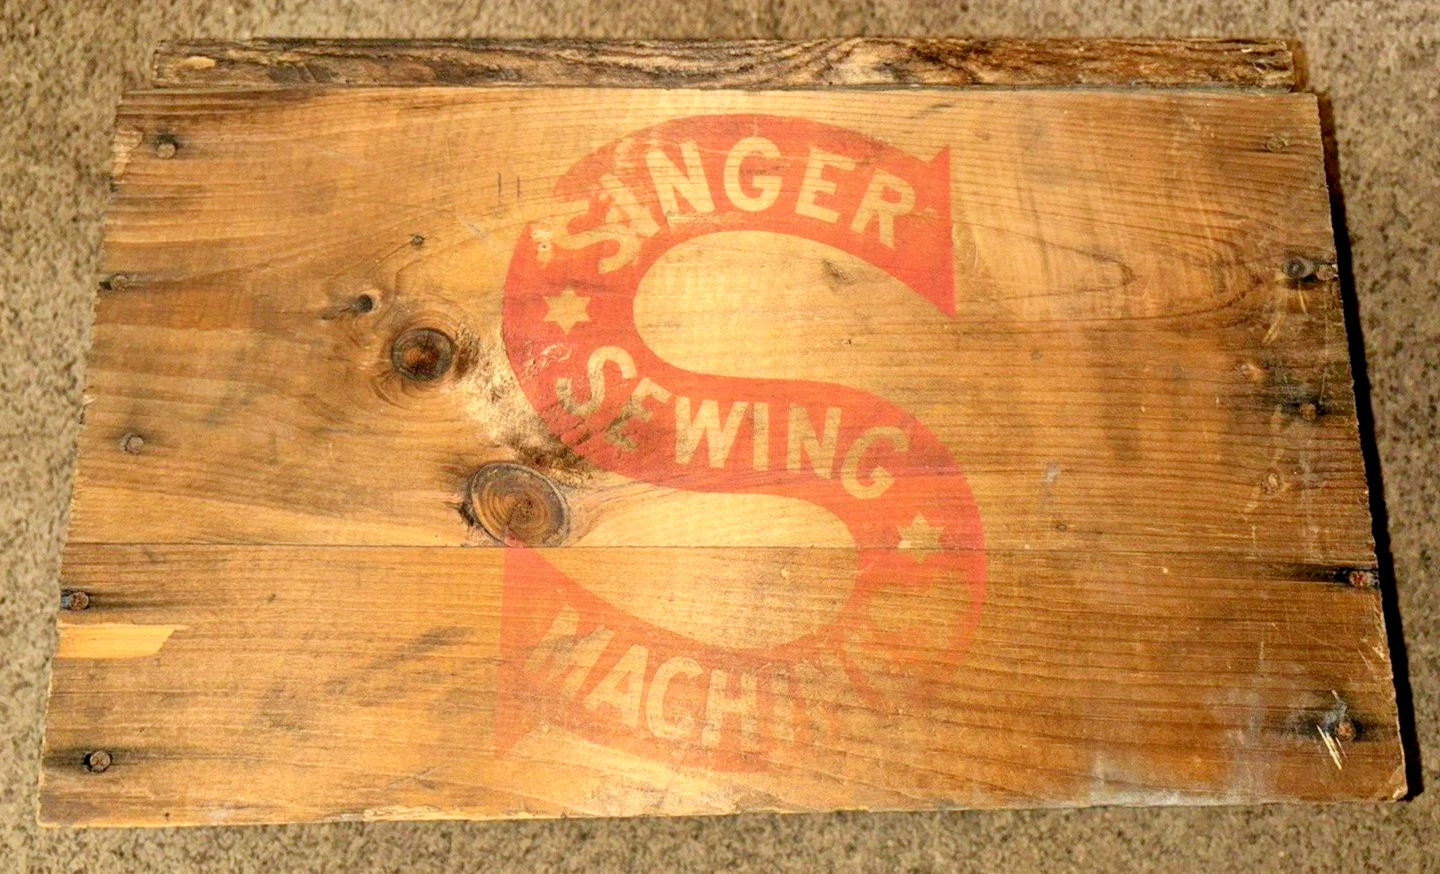 Antique Singer Sewing Machines Wood Shipping Box/Crate (Terre Hill, PA)